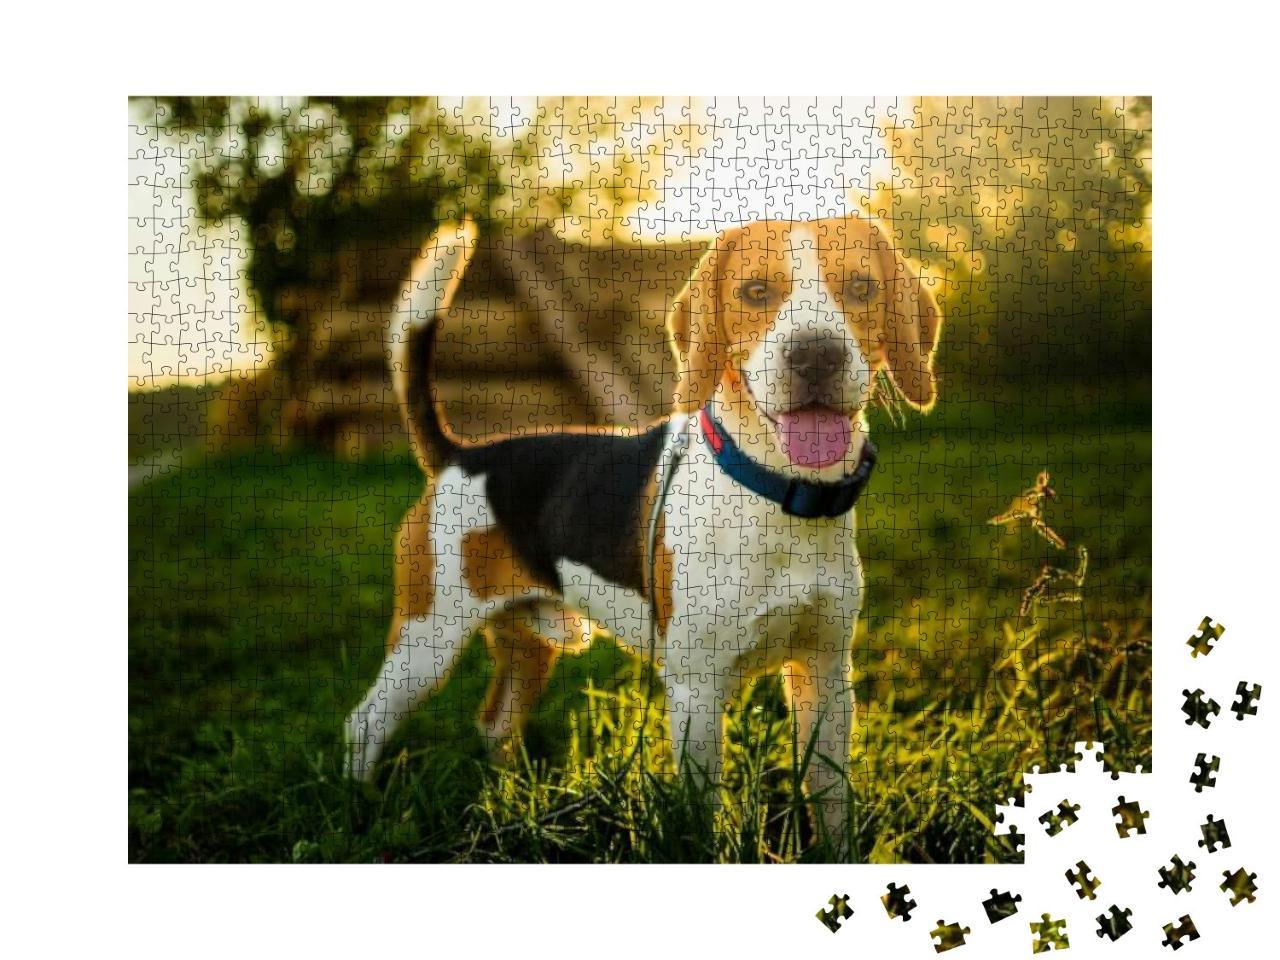 Dog Portrait Back Lit Background. Beagle with Tongue Out... Jigsaw Puzzle with 1000 pieces